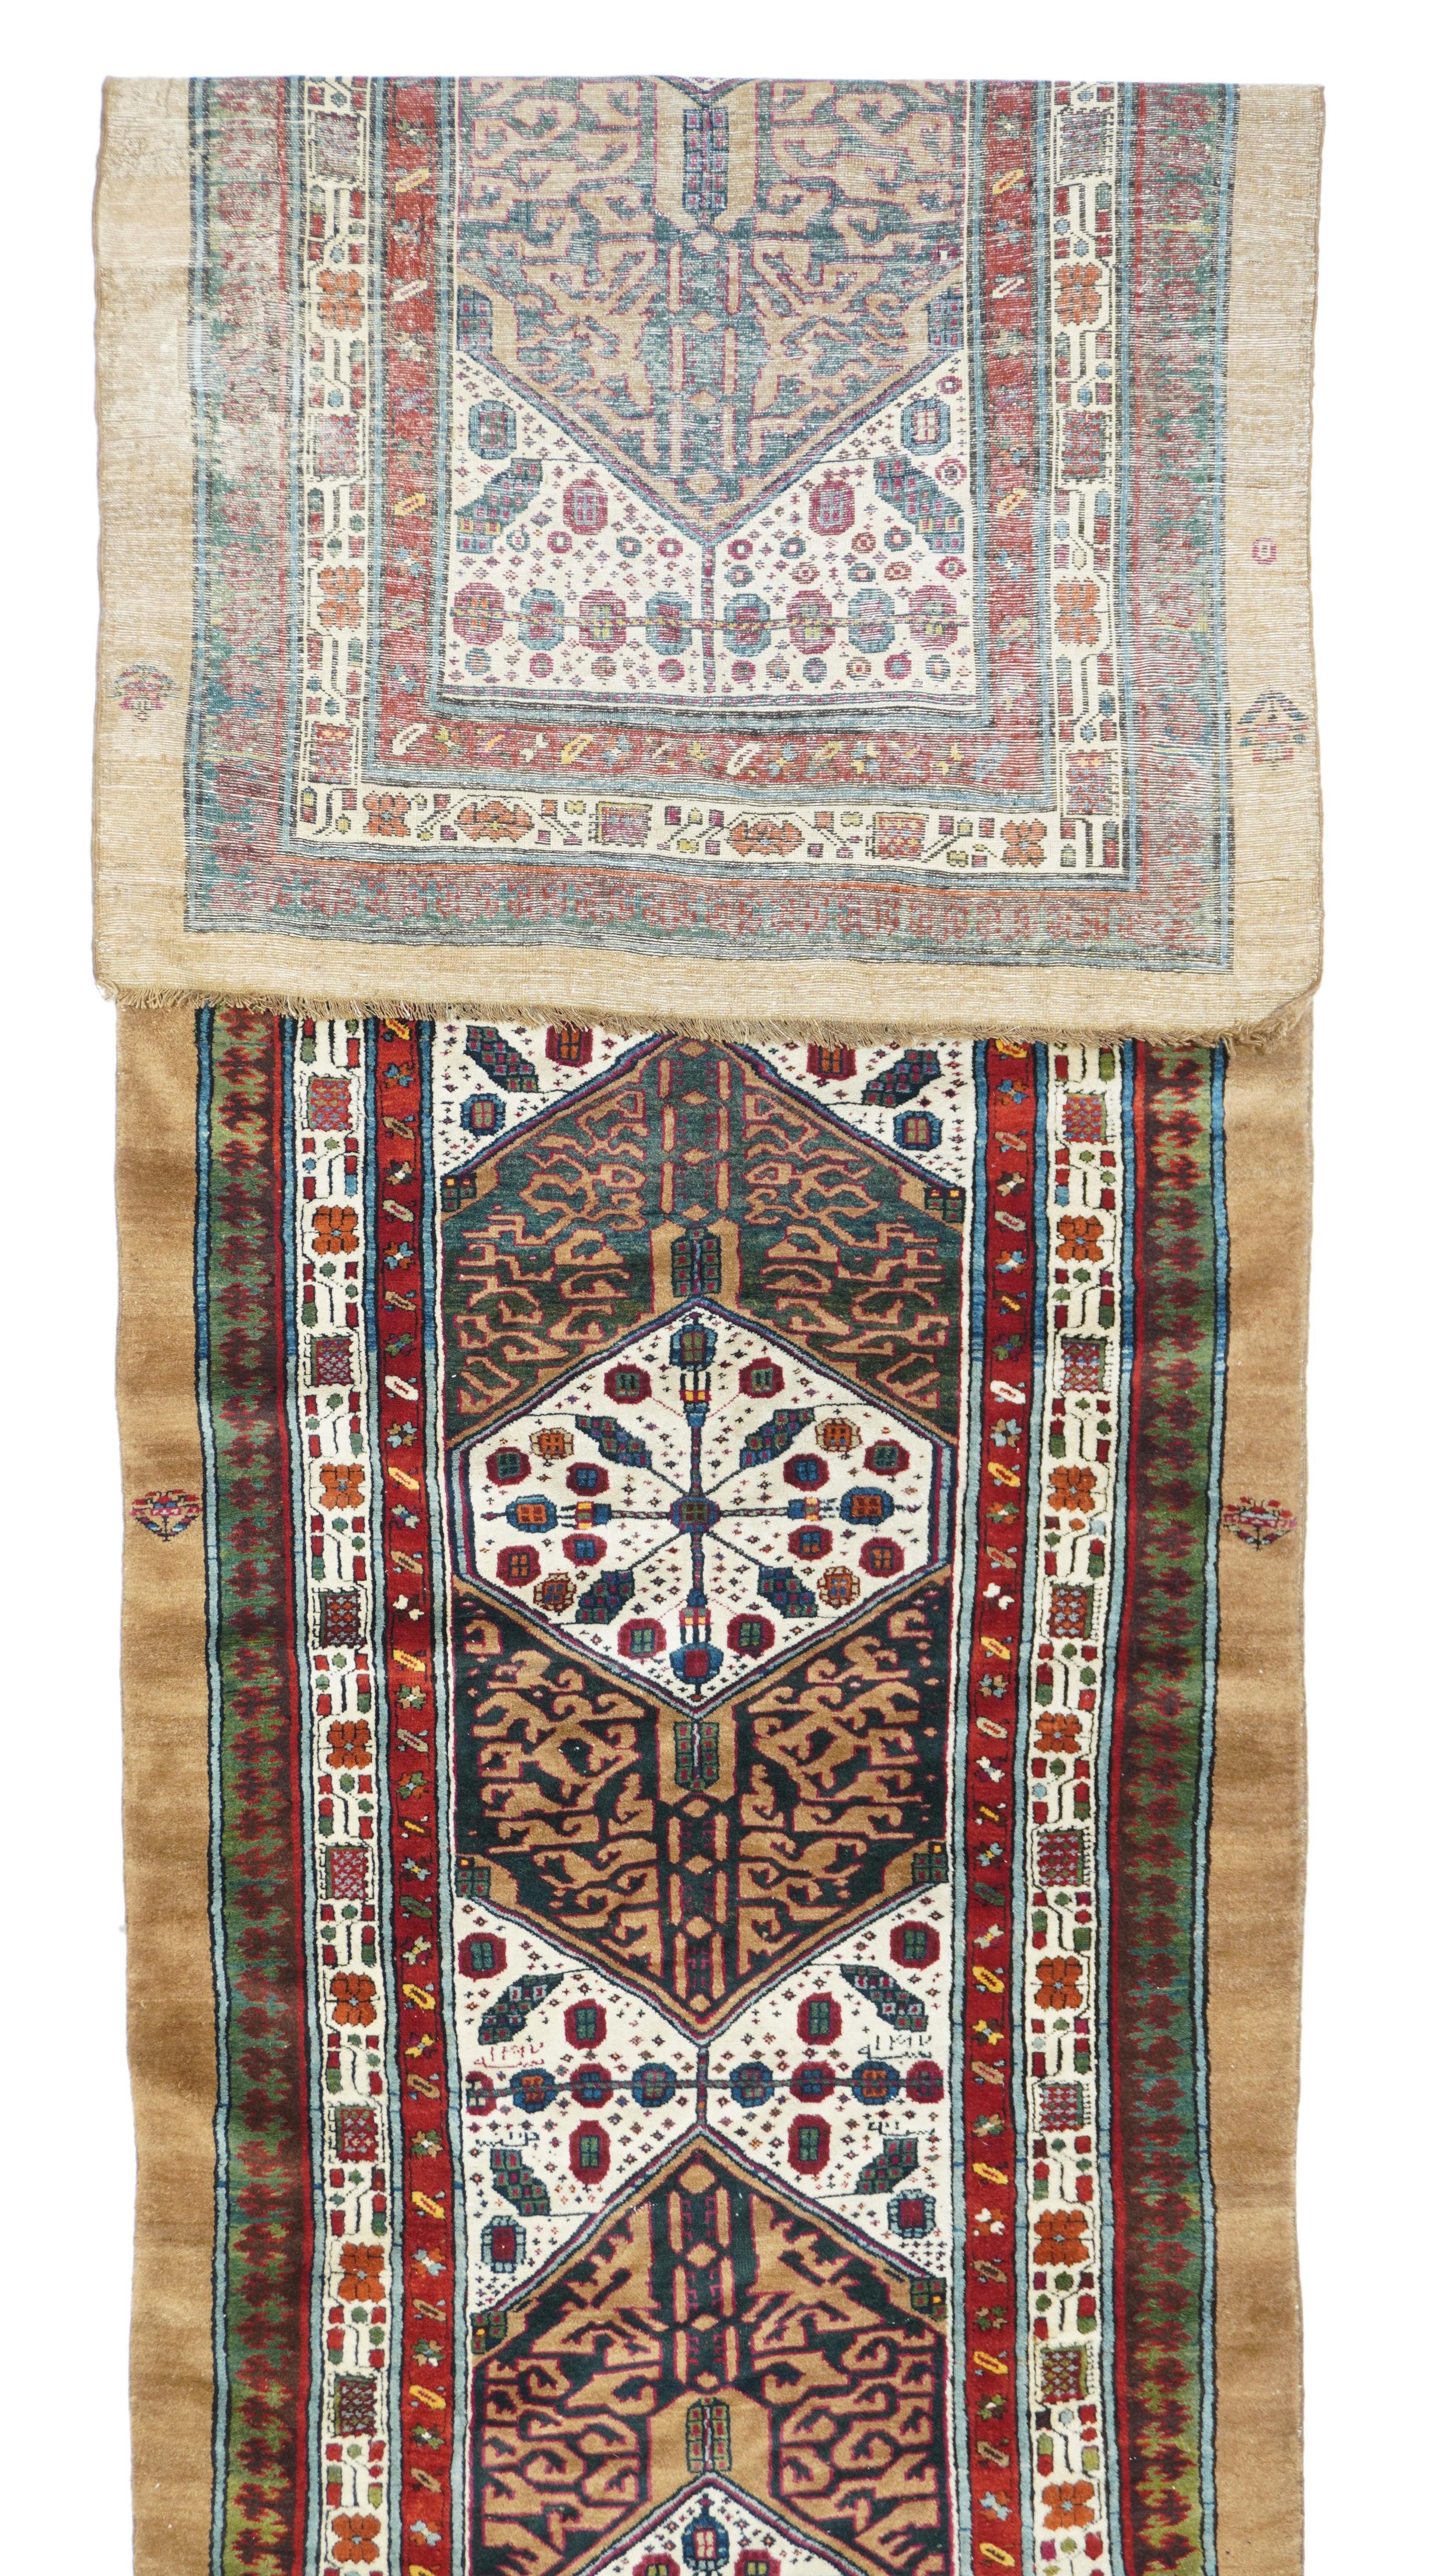 In the Sarab style, but unusually on cotton, this rustic kenare (runner) features three hexagonal camel Ð tone panels enclosing smaller ecru hexagons, with en suite trapezoid fillers. Dark blue mazeworks in the camel sections. Virtually plain